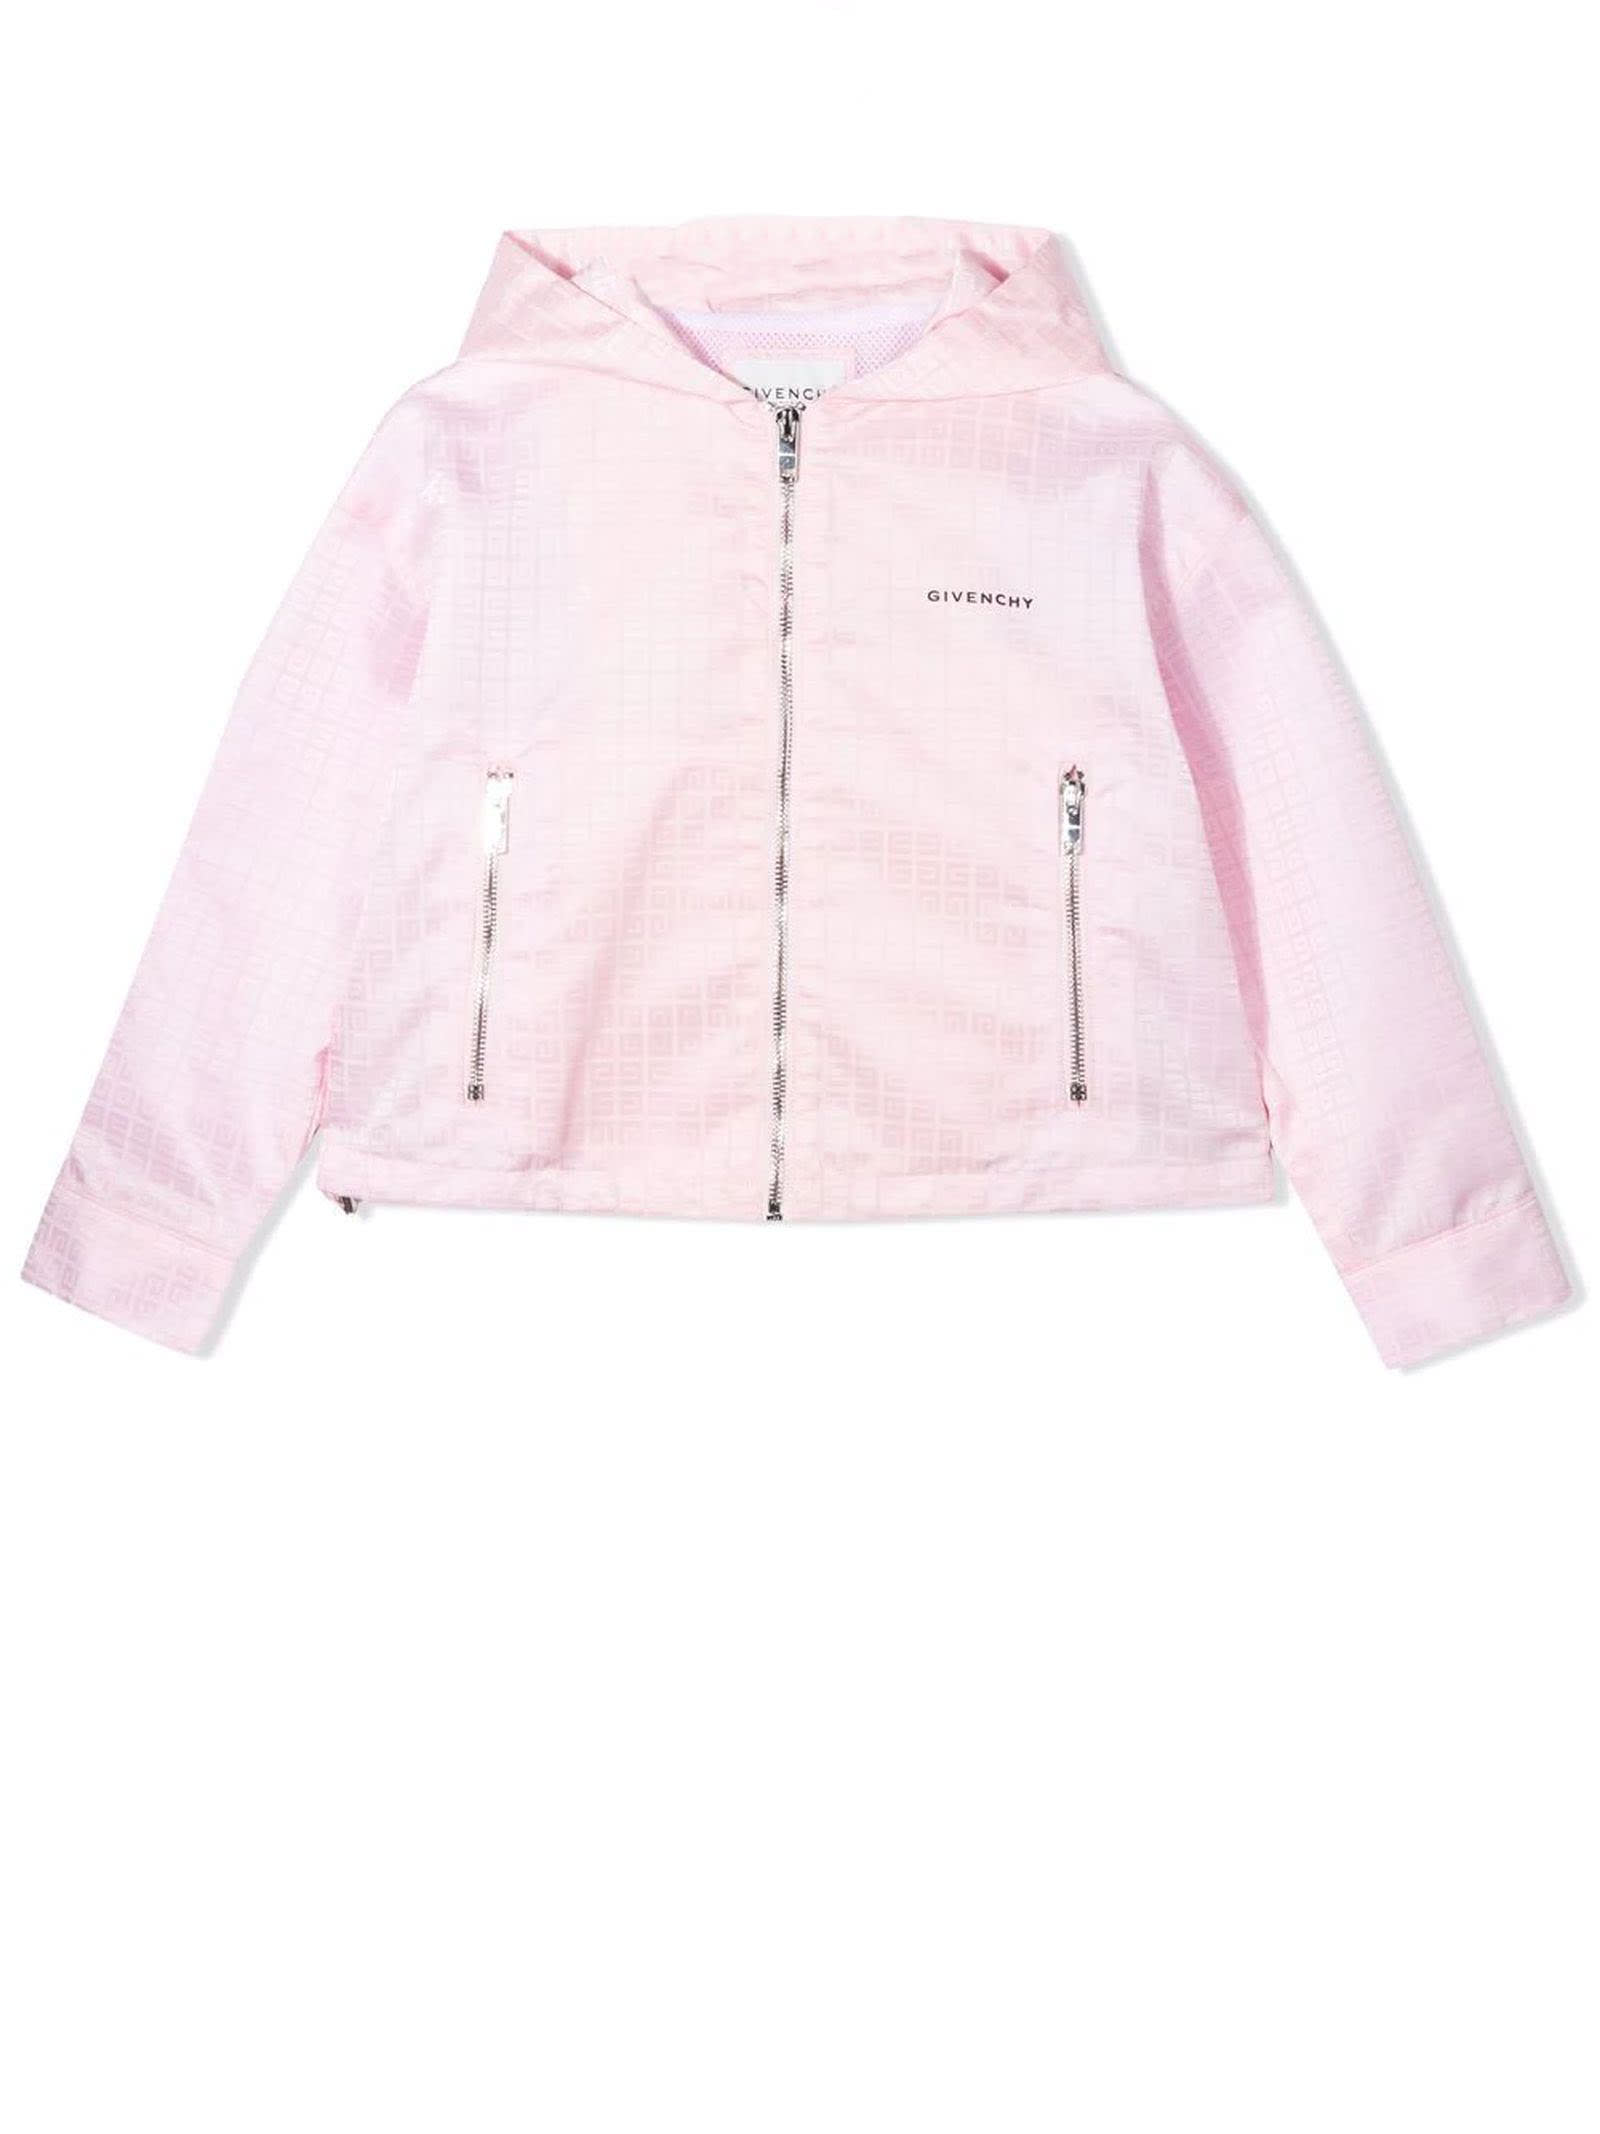 Givenchy Pink Polyester Jacket